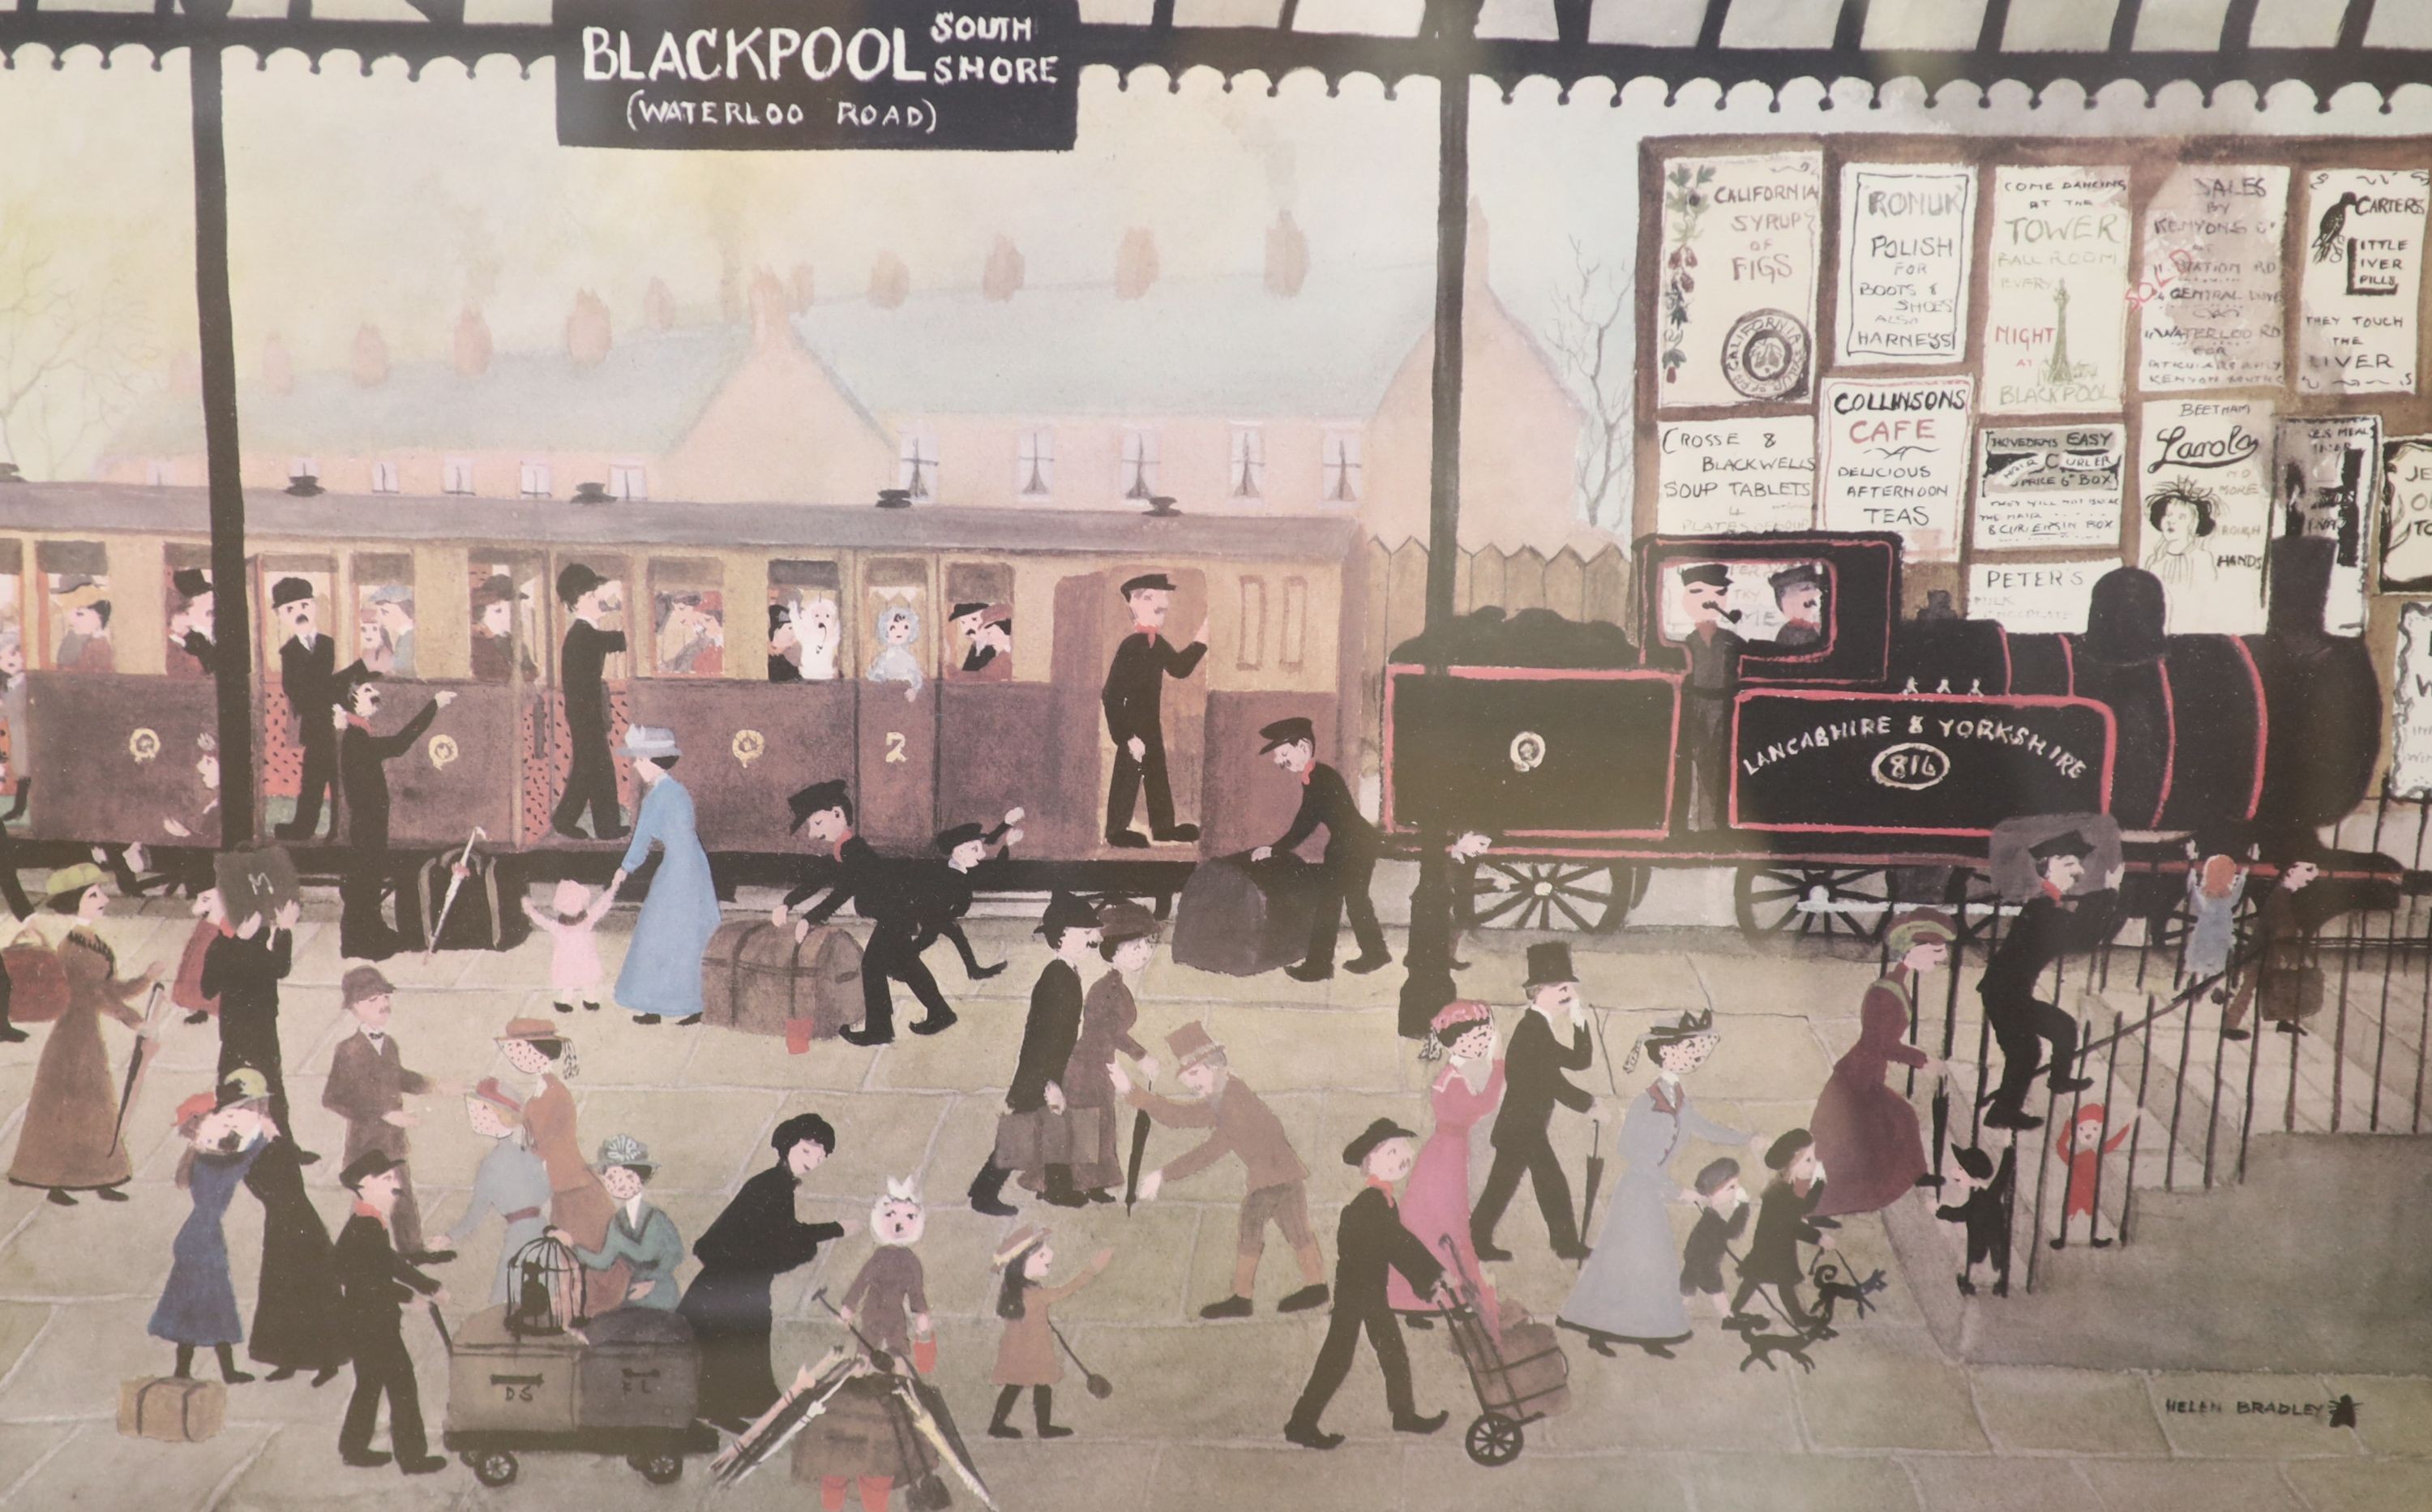 Helen Bradley, two signed prints, Blackpool Station and Blackpool Sands, both signed in pencil, overall 40 x 57cm and 48 x 62cm